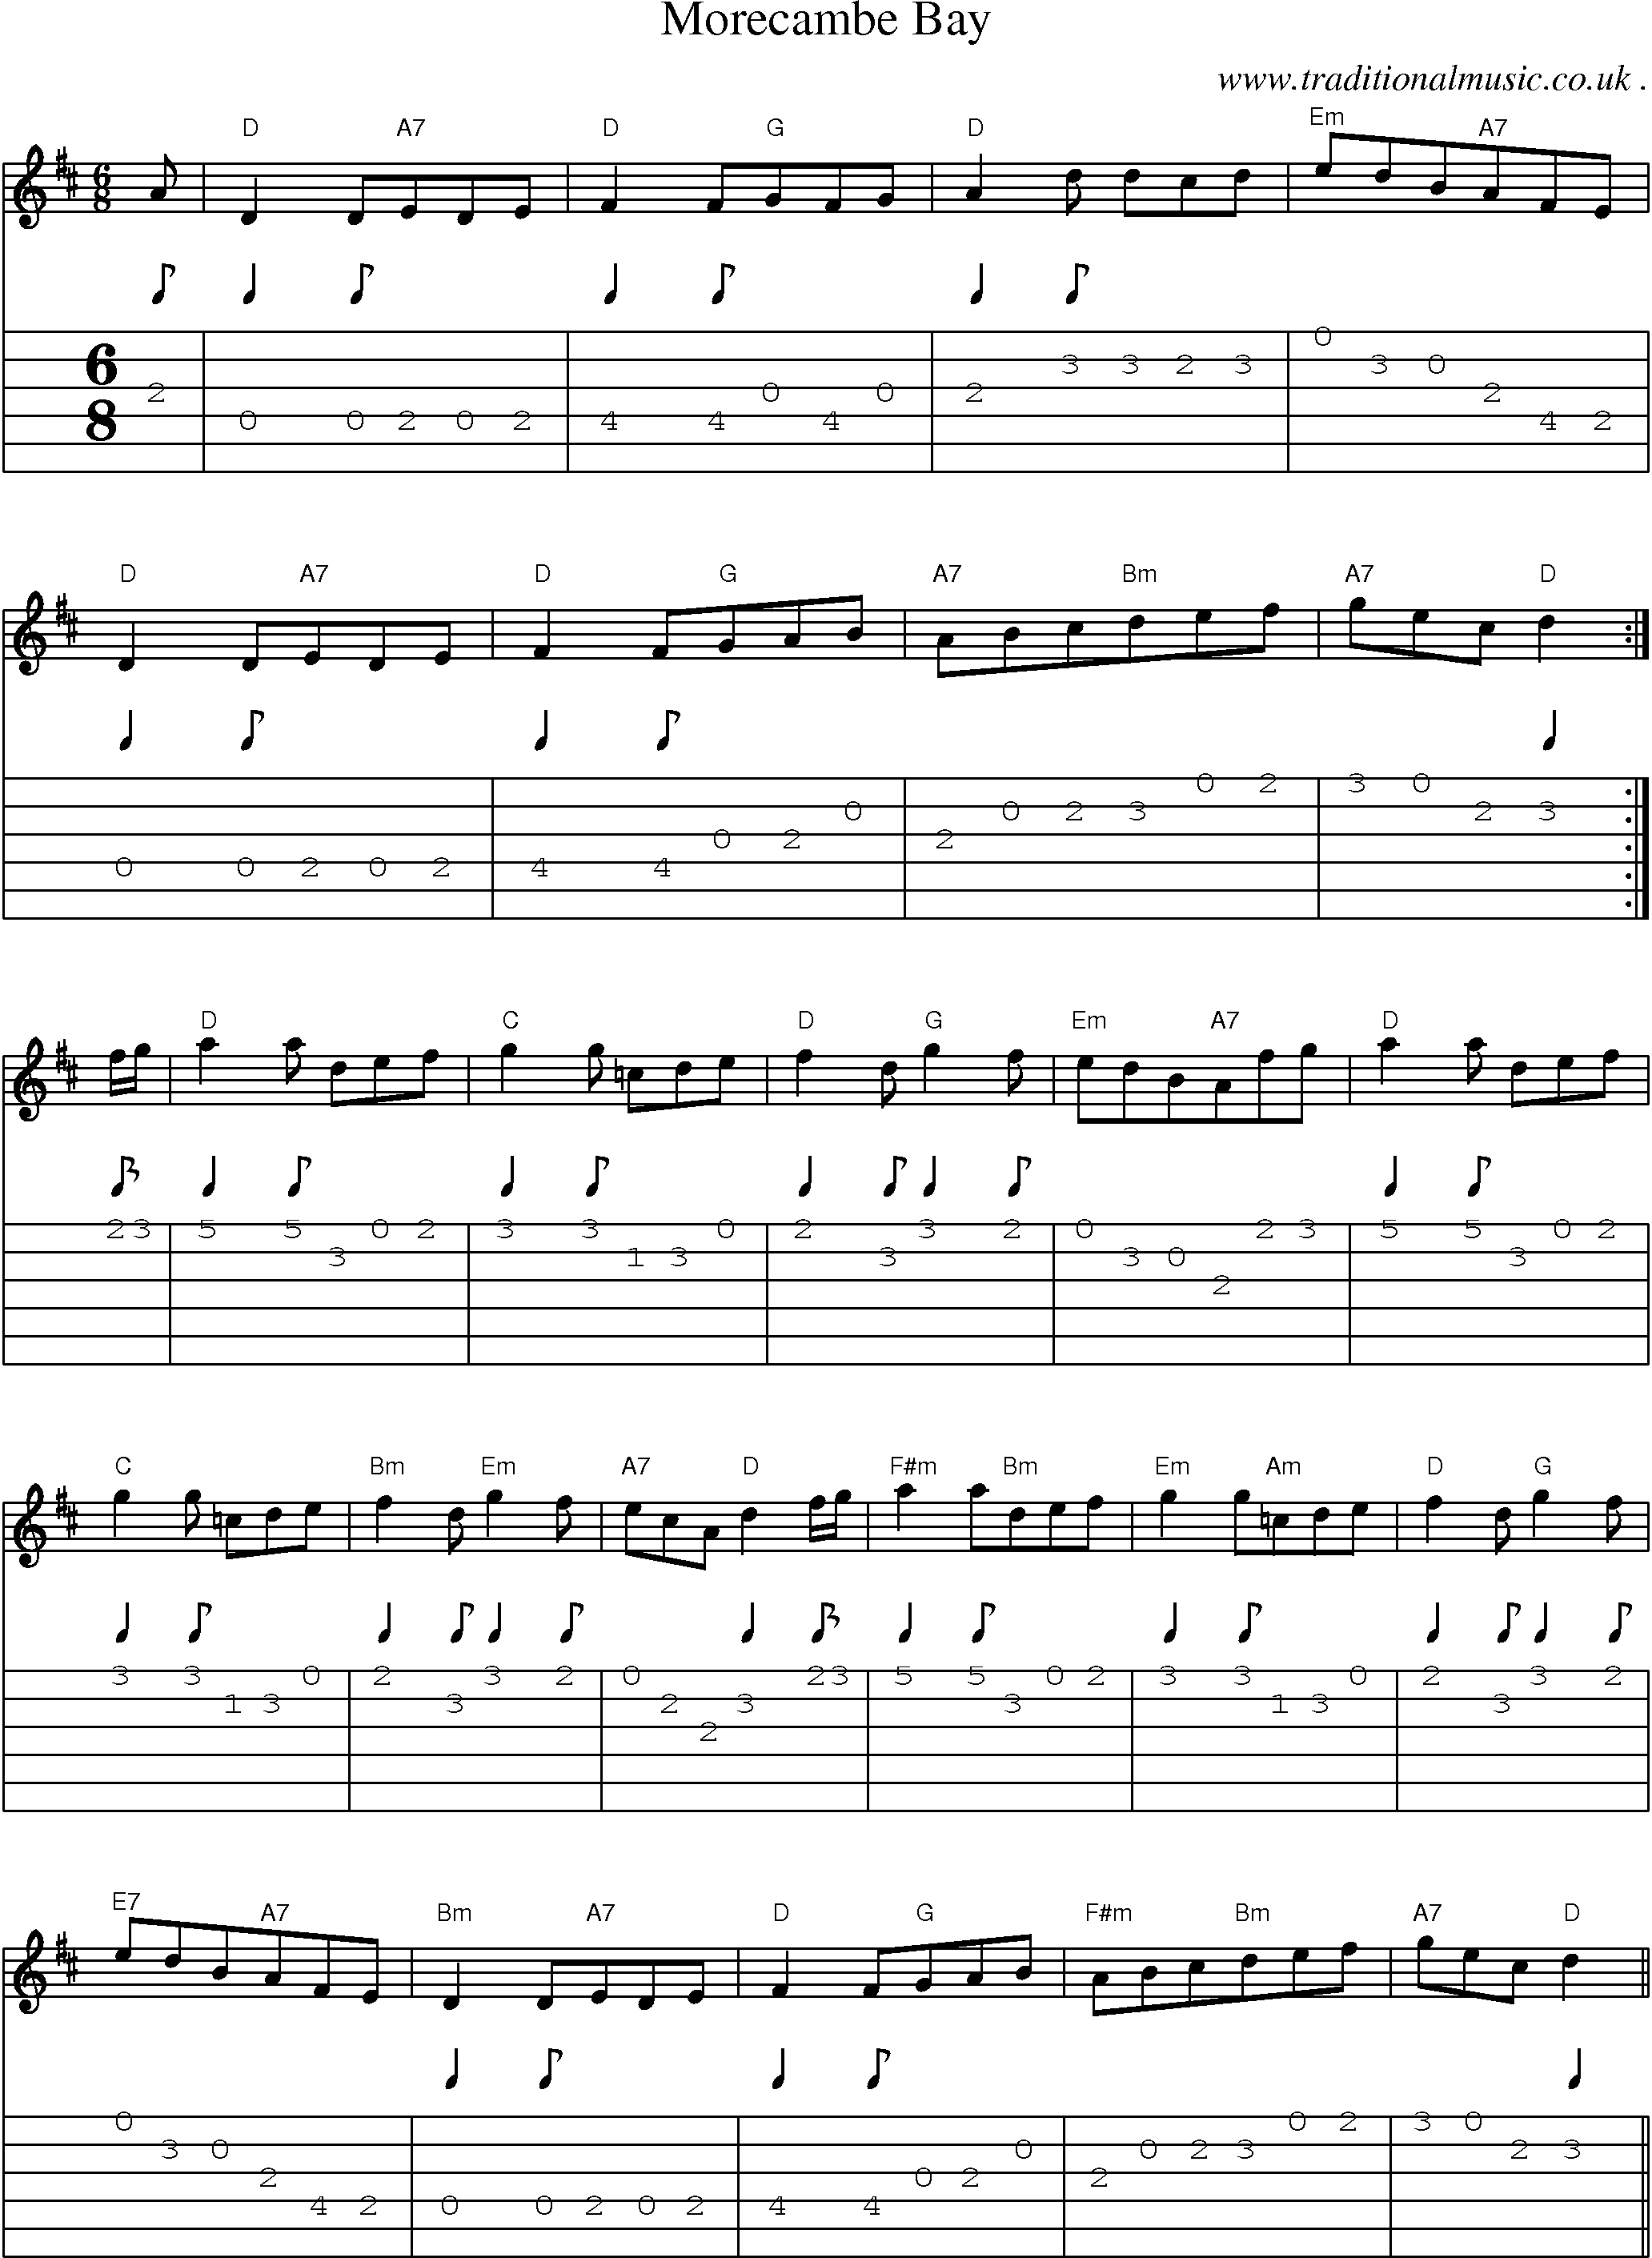 Sheet-Music and Guitar Tabs for Morecambe Bay